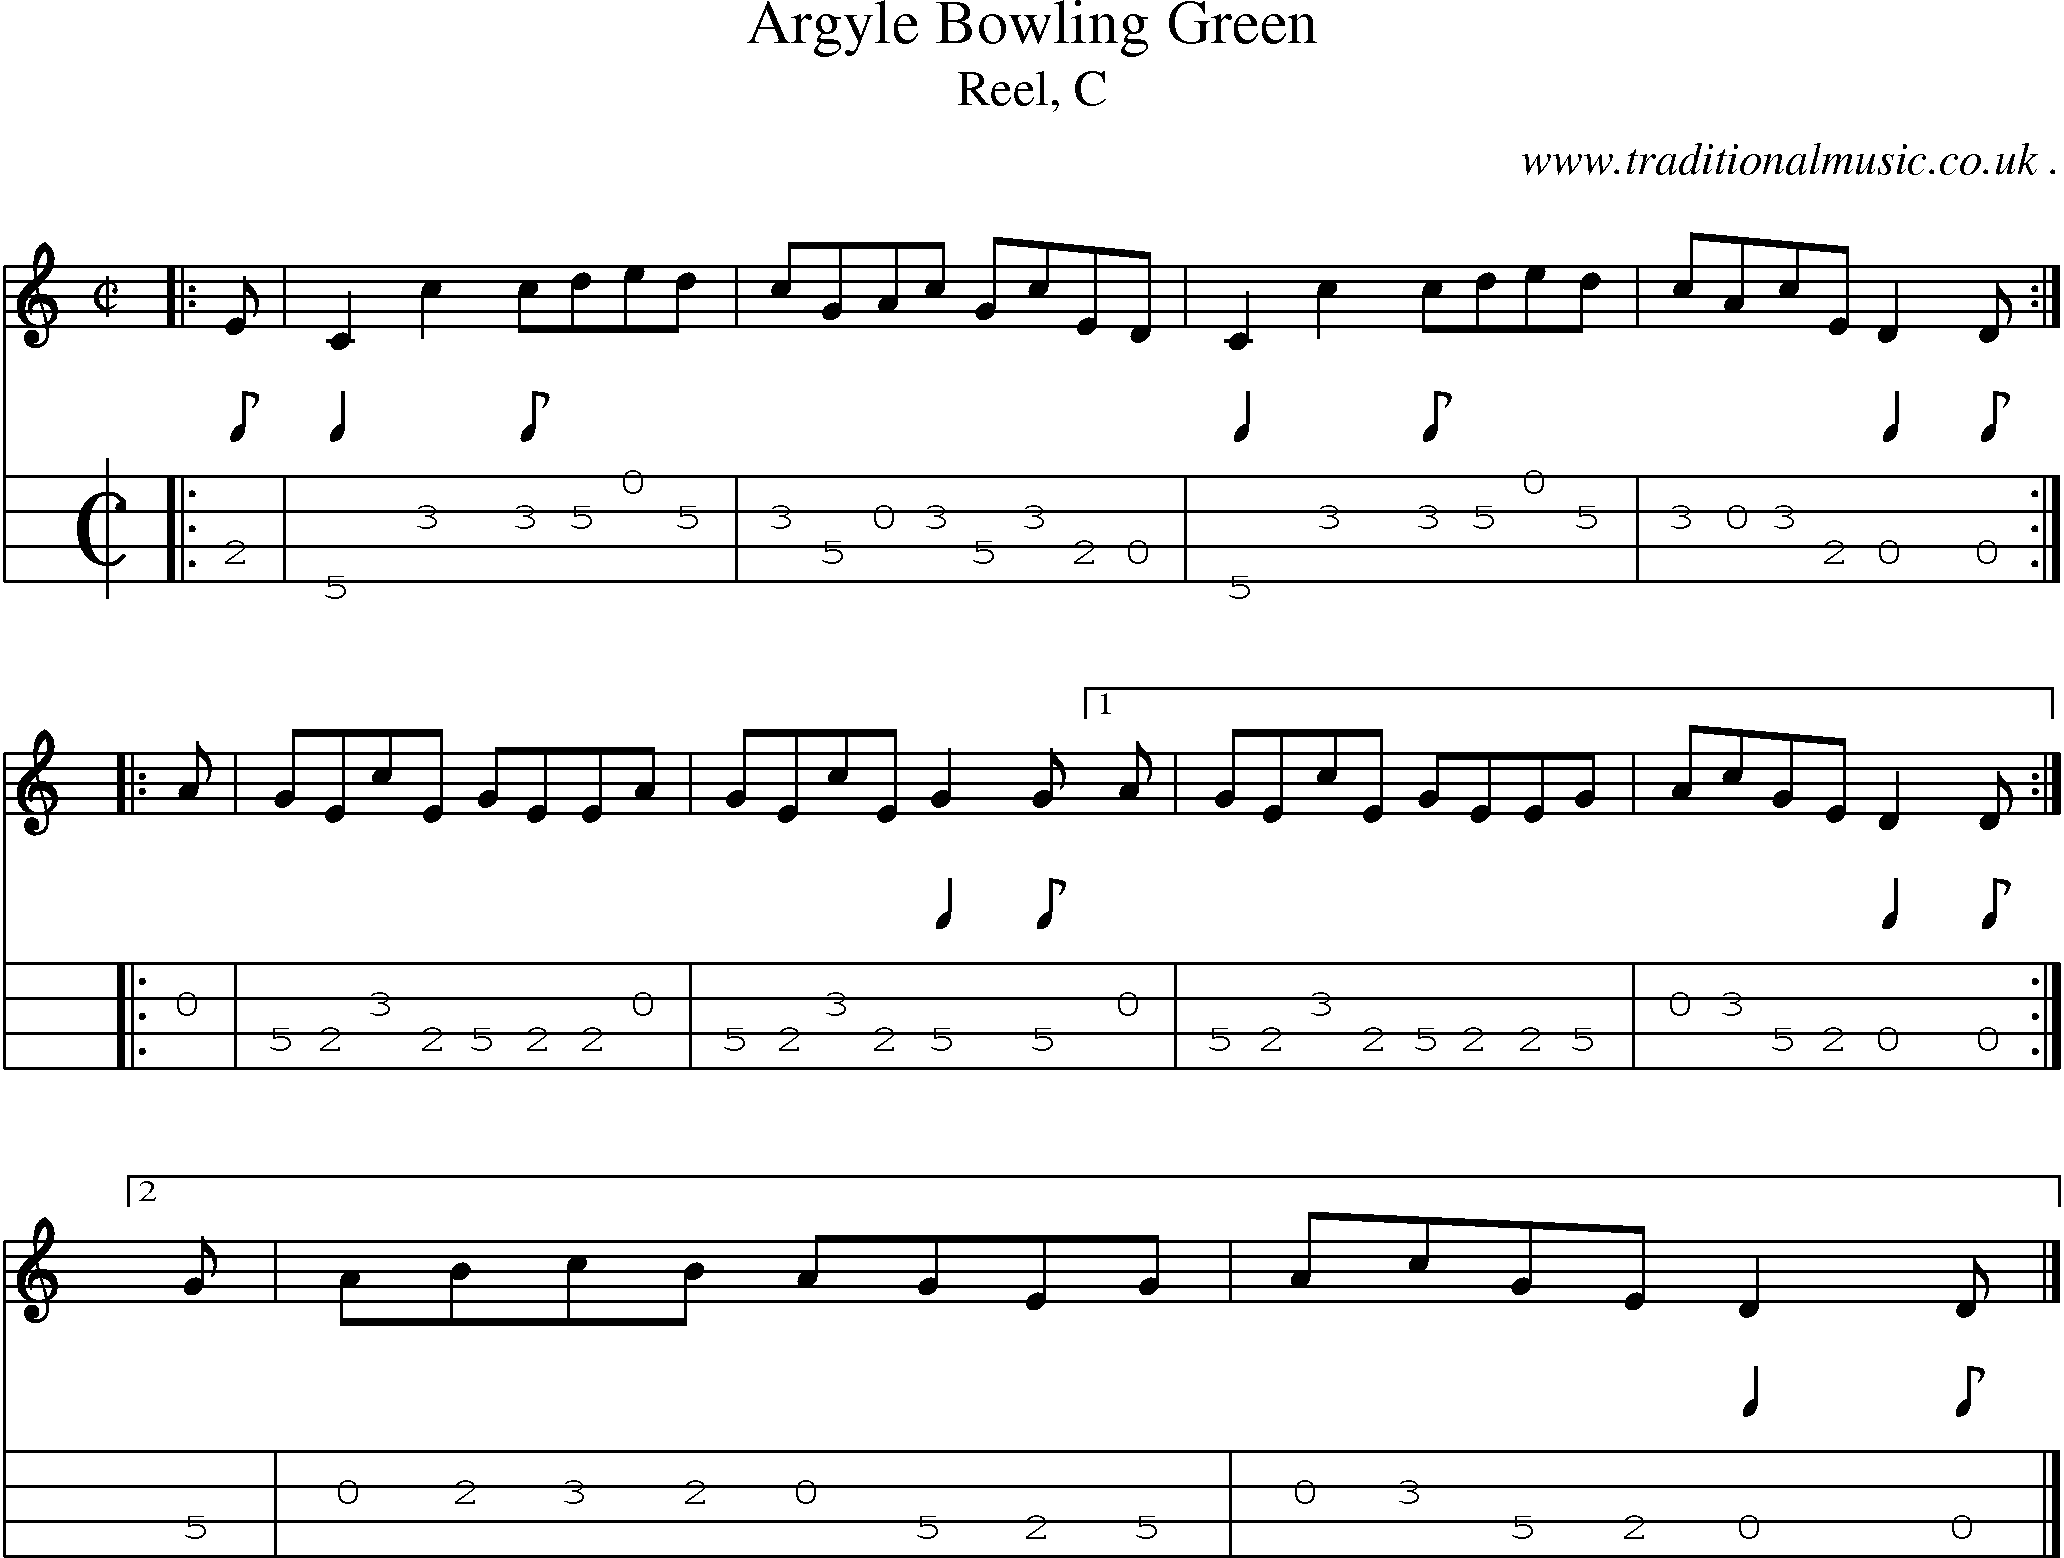 Sheet-music  score, Chords and Mandolin Tabs for Argyle Bowling Green